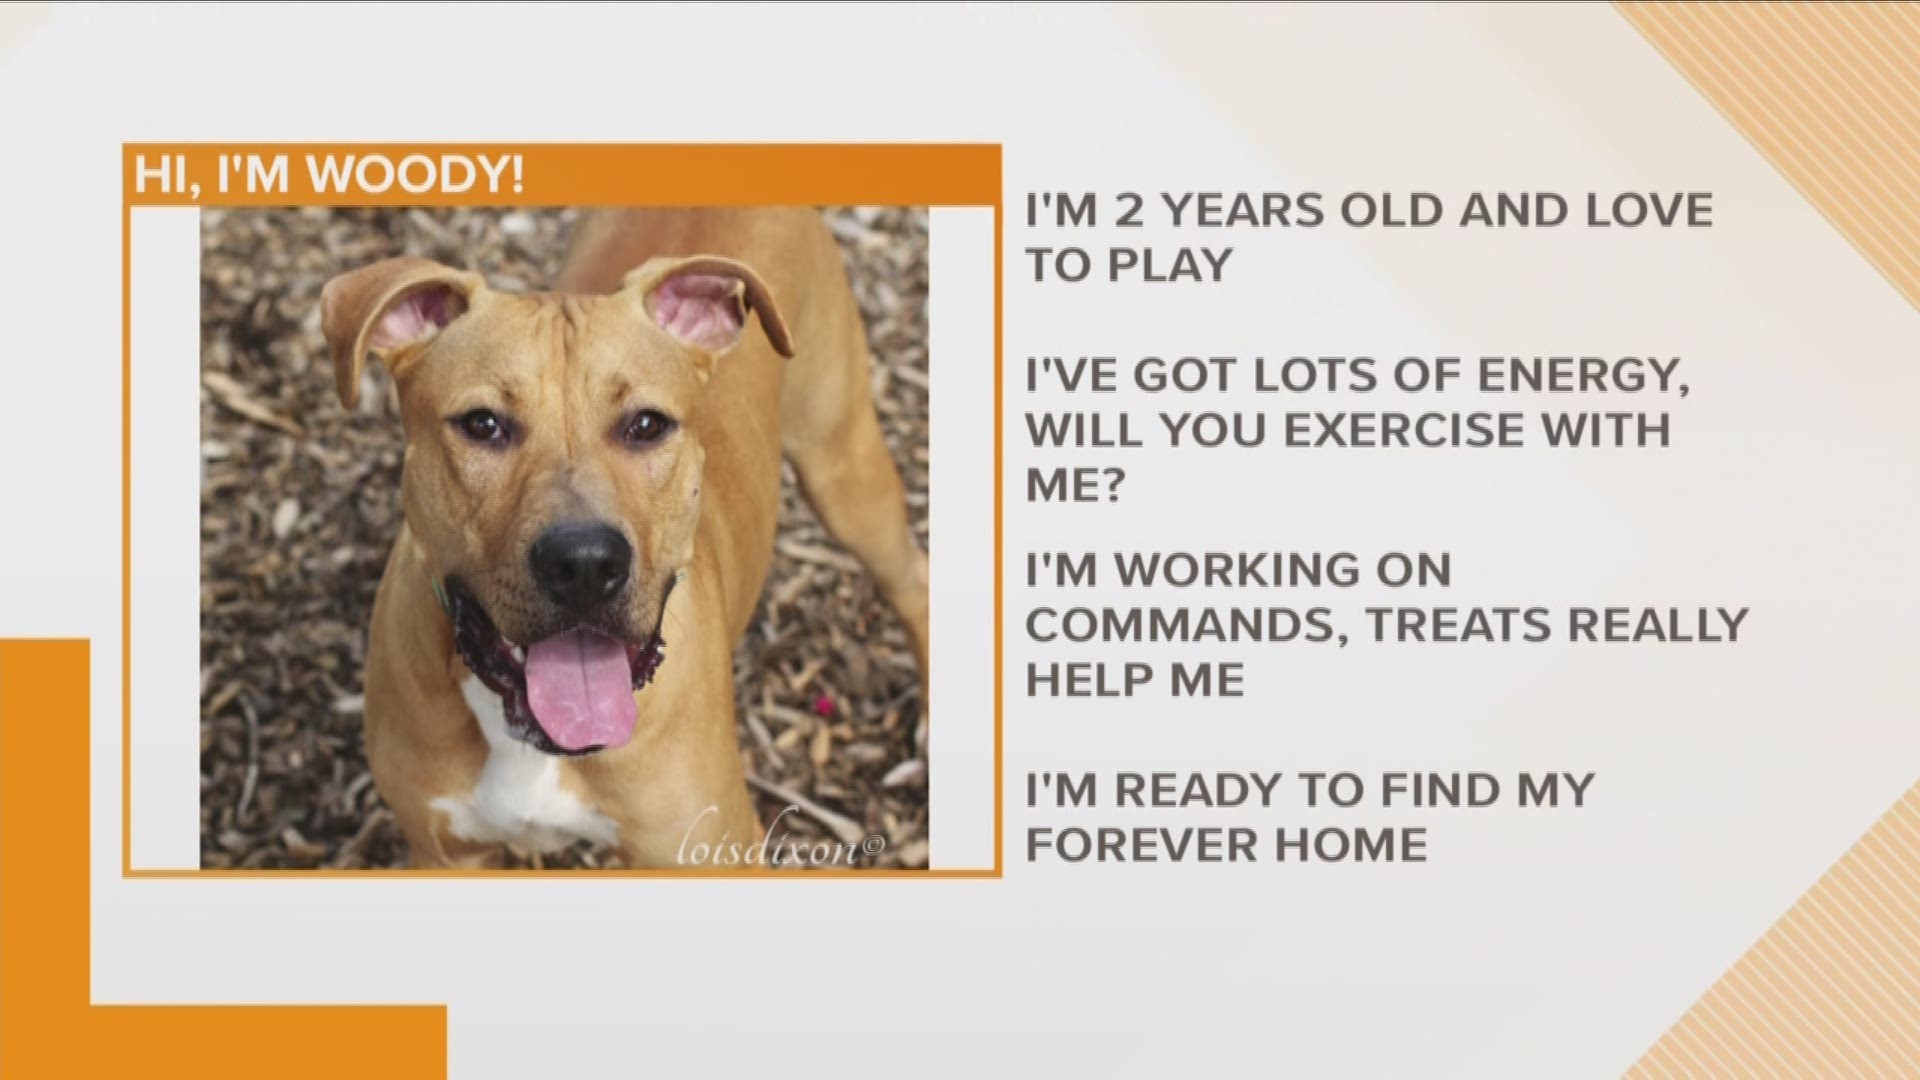 Woody the dog is looking or a fun-loving home!  You can come check him out Burlington Animal Services.